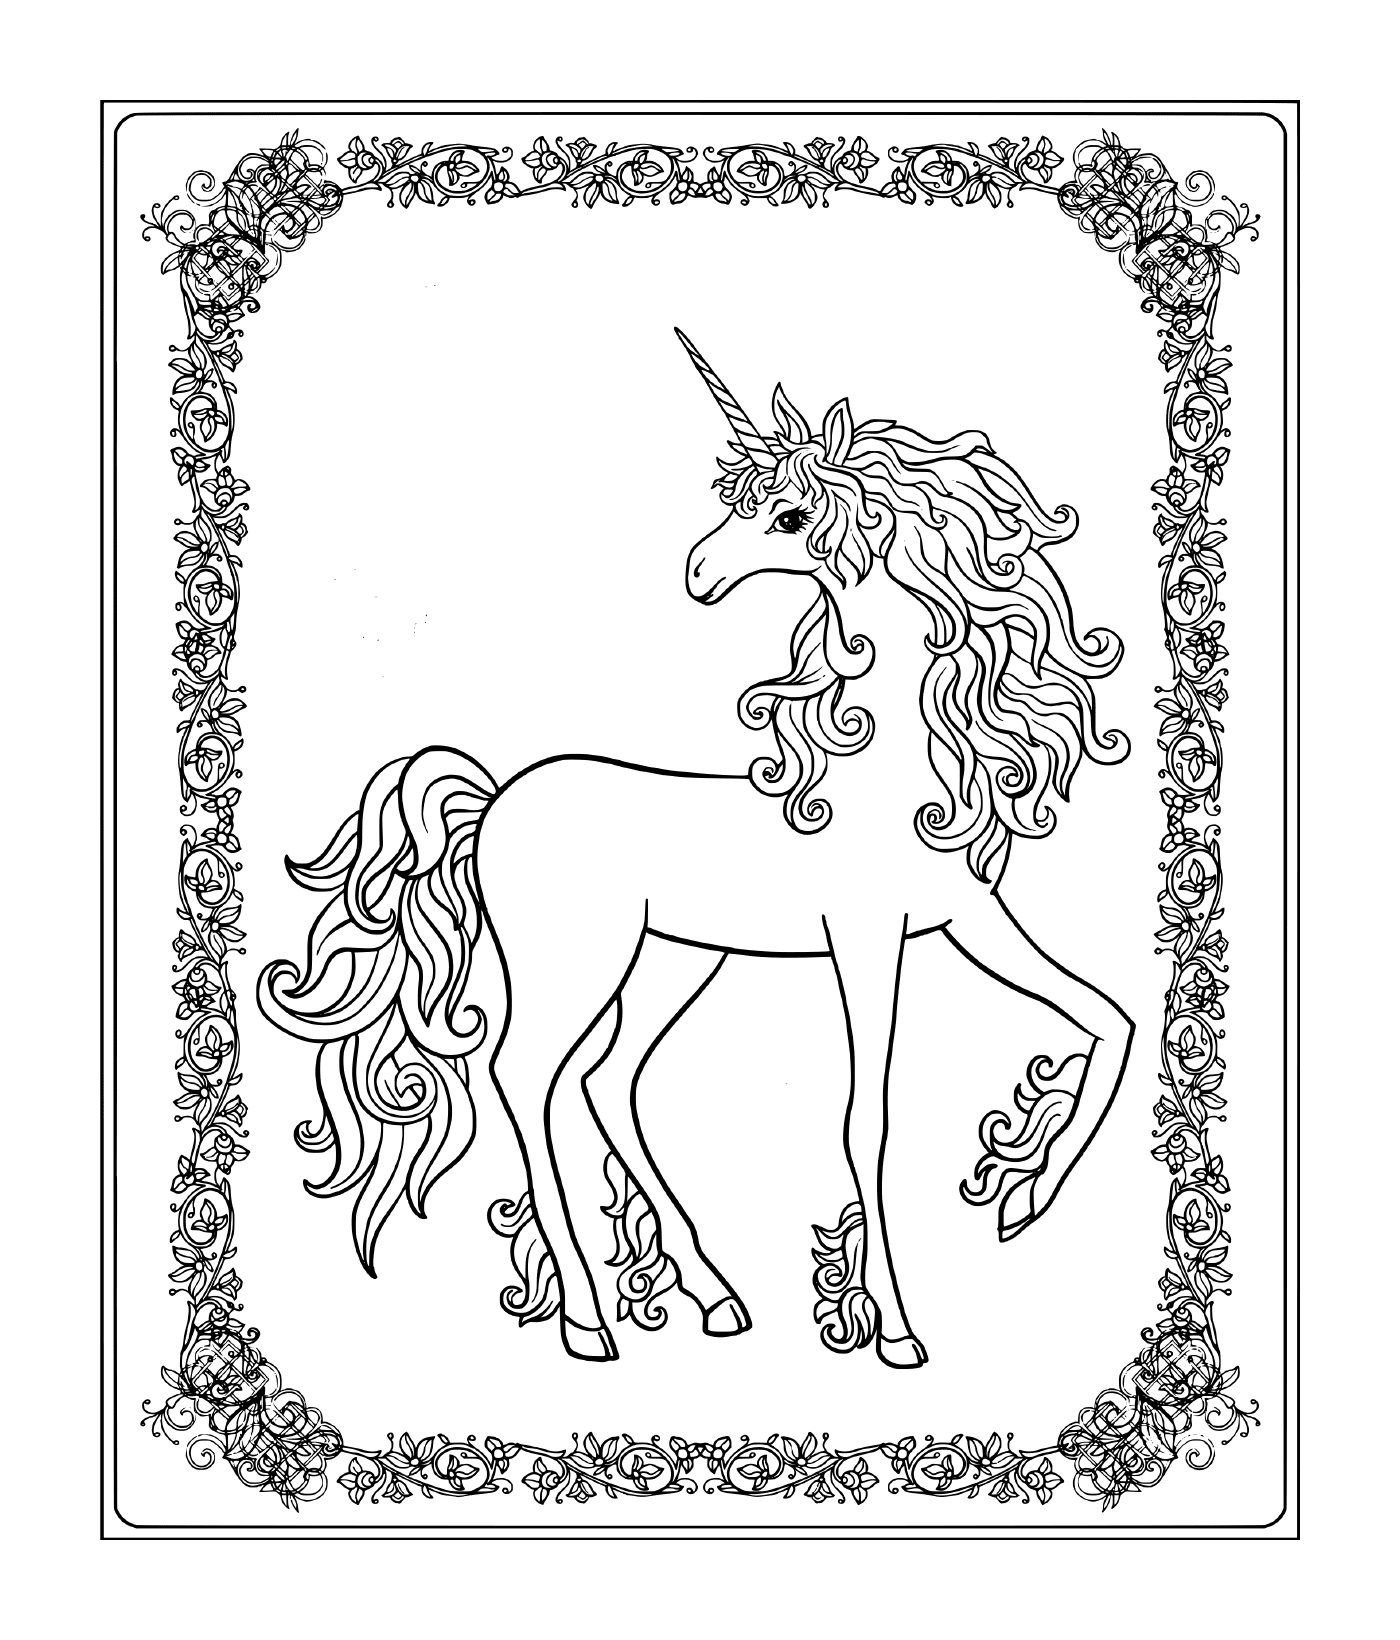  royal unicorn surrounded by flowers 